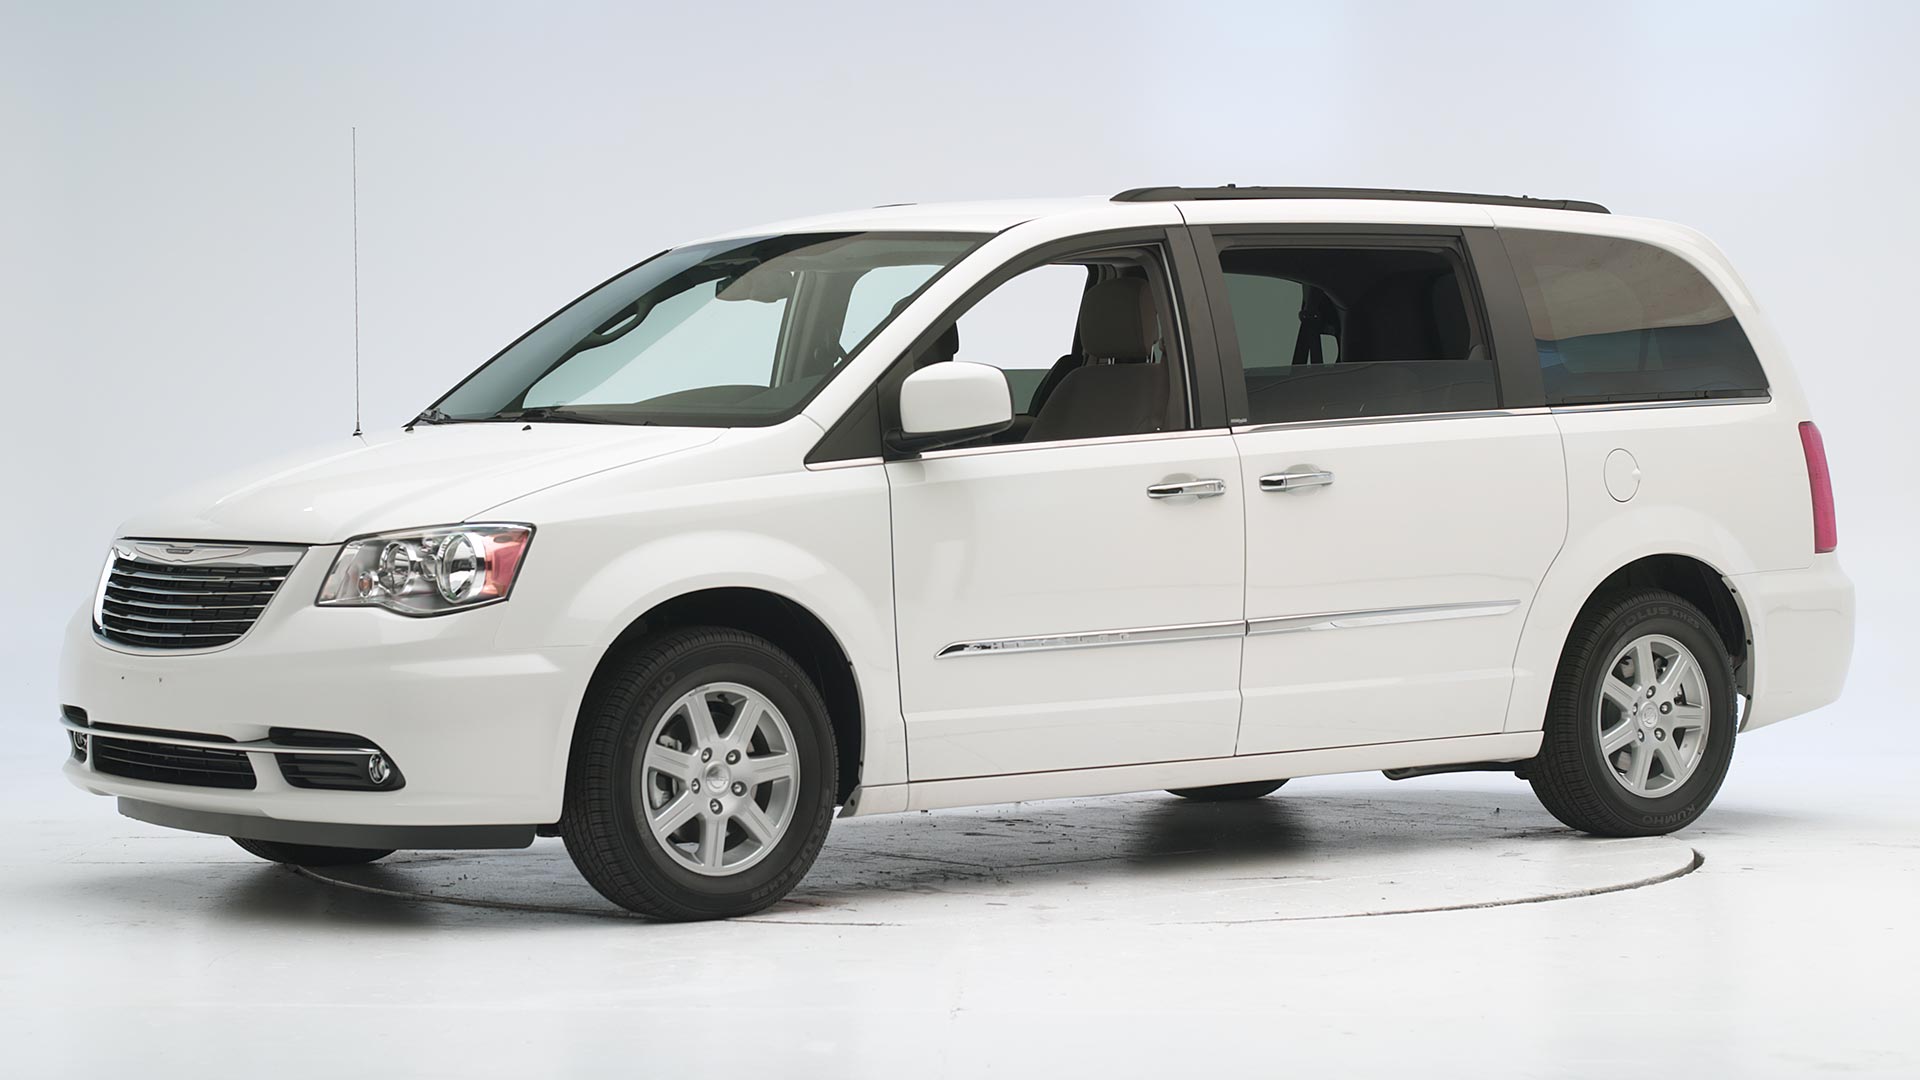 2012 chrysler town and country van